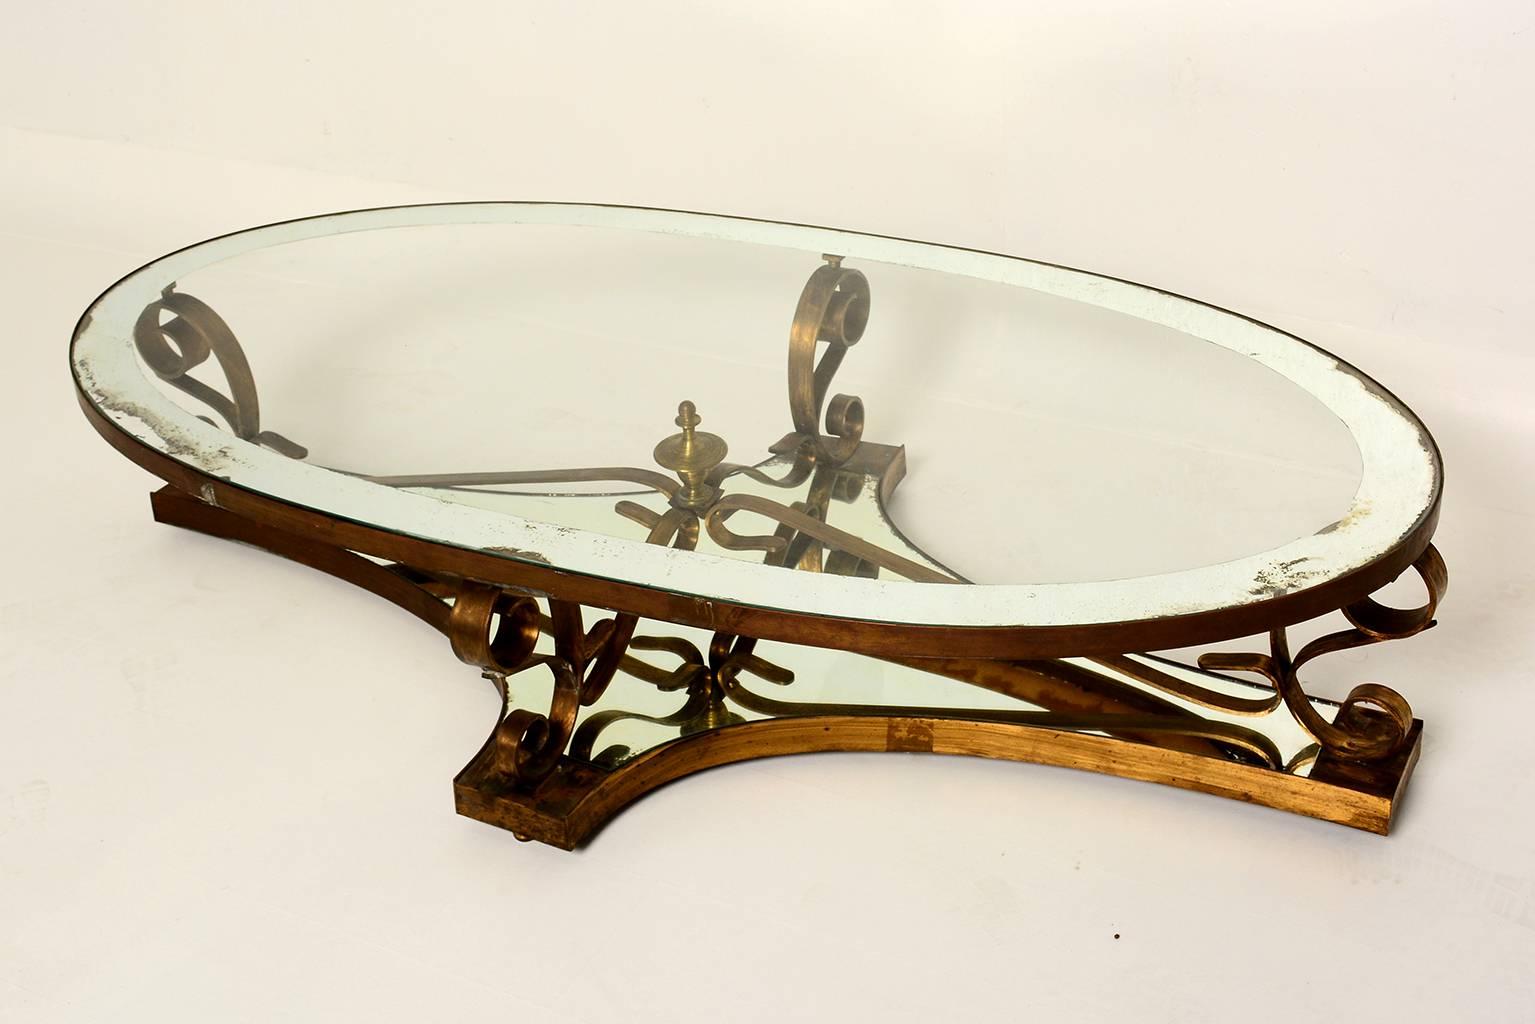 For your consideration a beautiful coffee/cocktail table by Arturo Pani.
Sculptural shape with solid brass. Original glass top with mirror band.